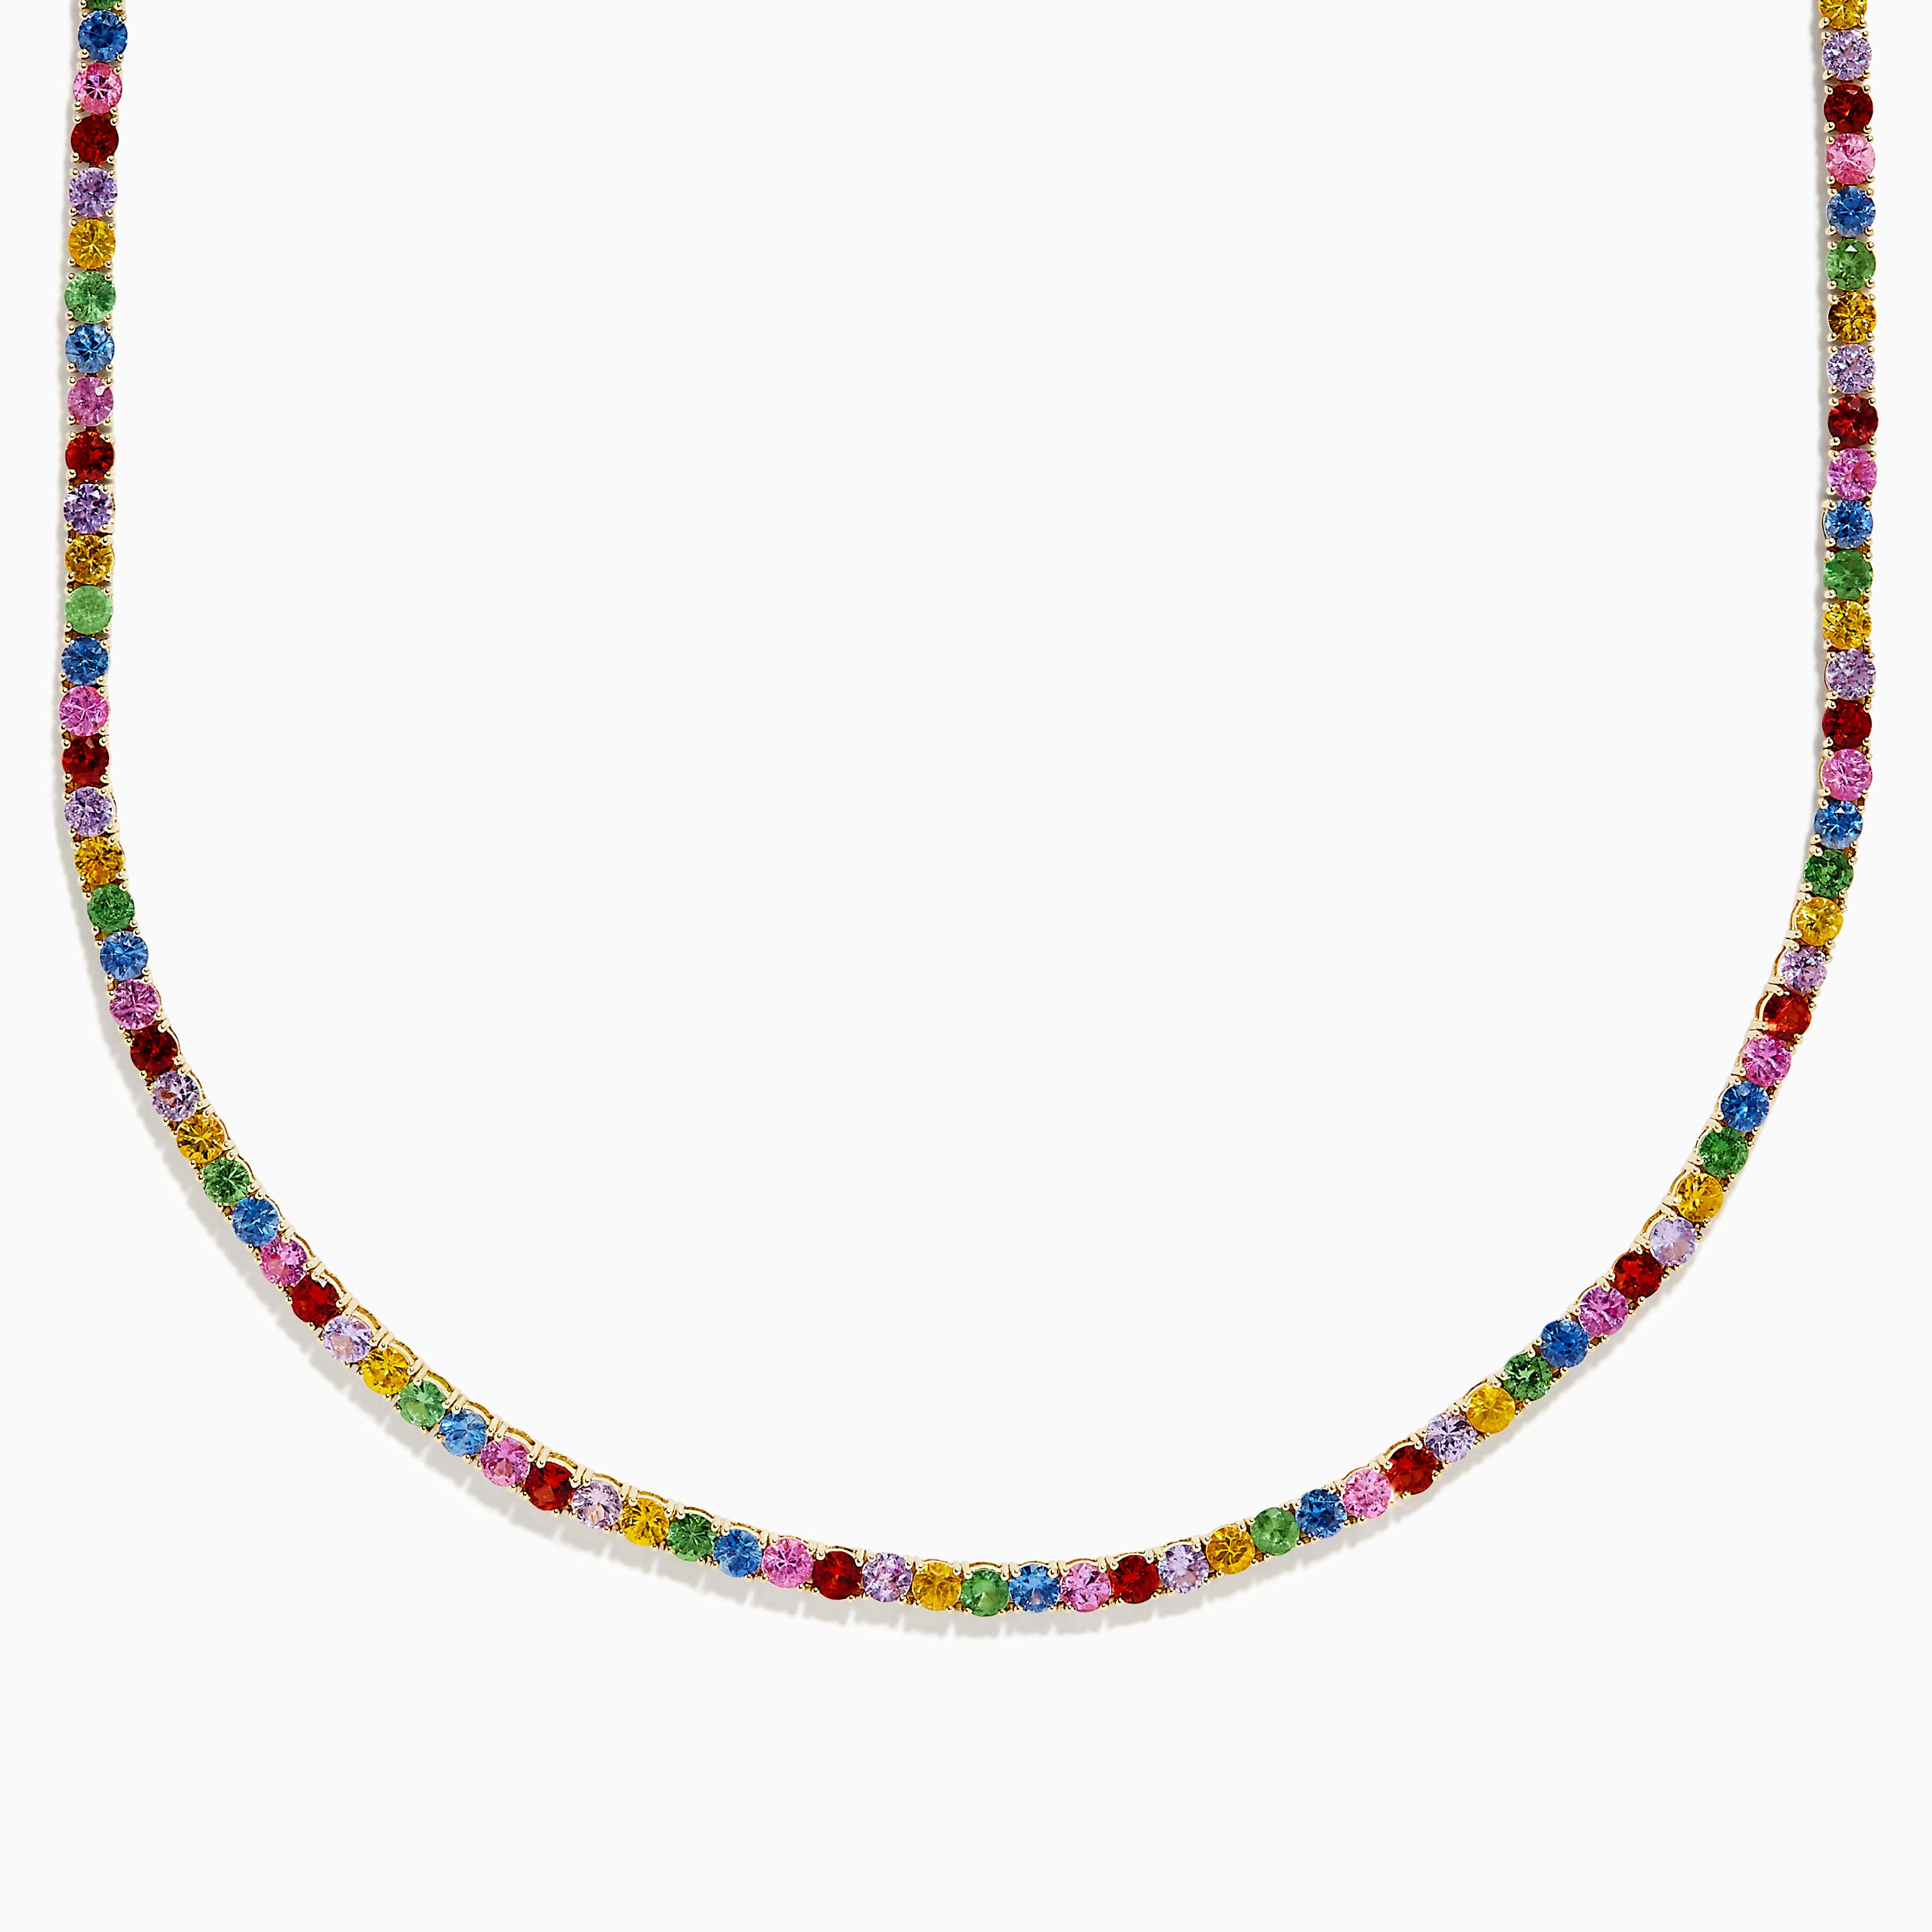 Effy Watercolors 14K Yellow Gold Multi Sapphire Necklace, 17.73 TCW